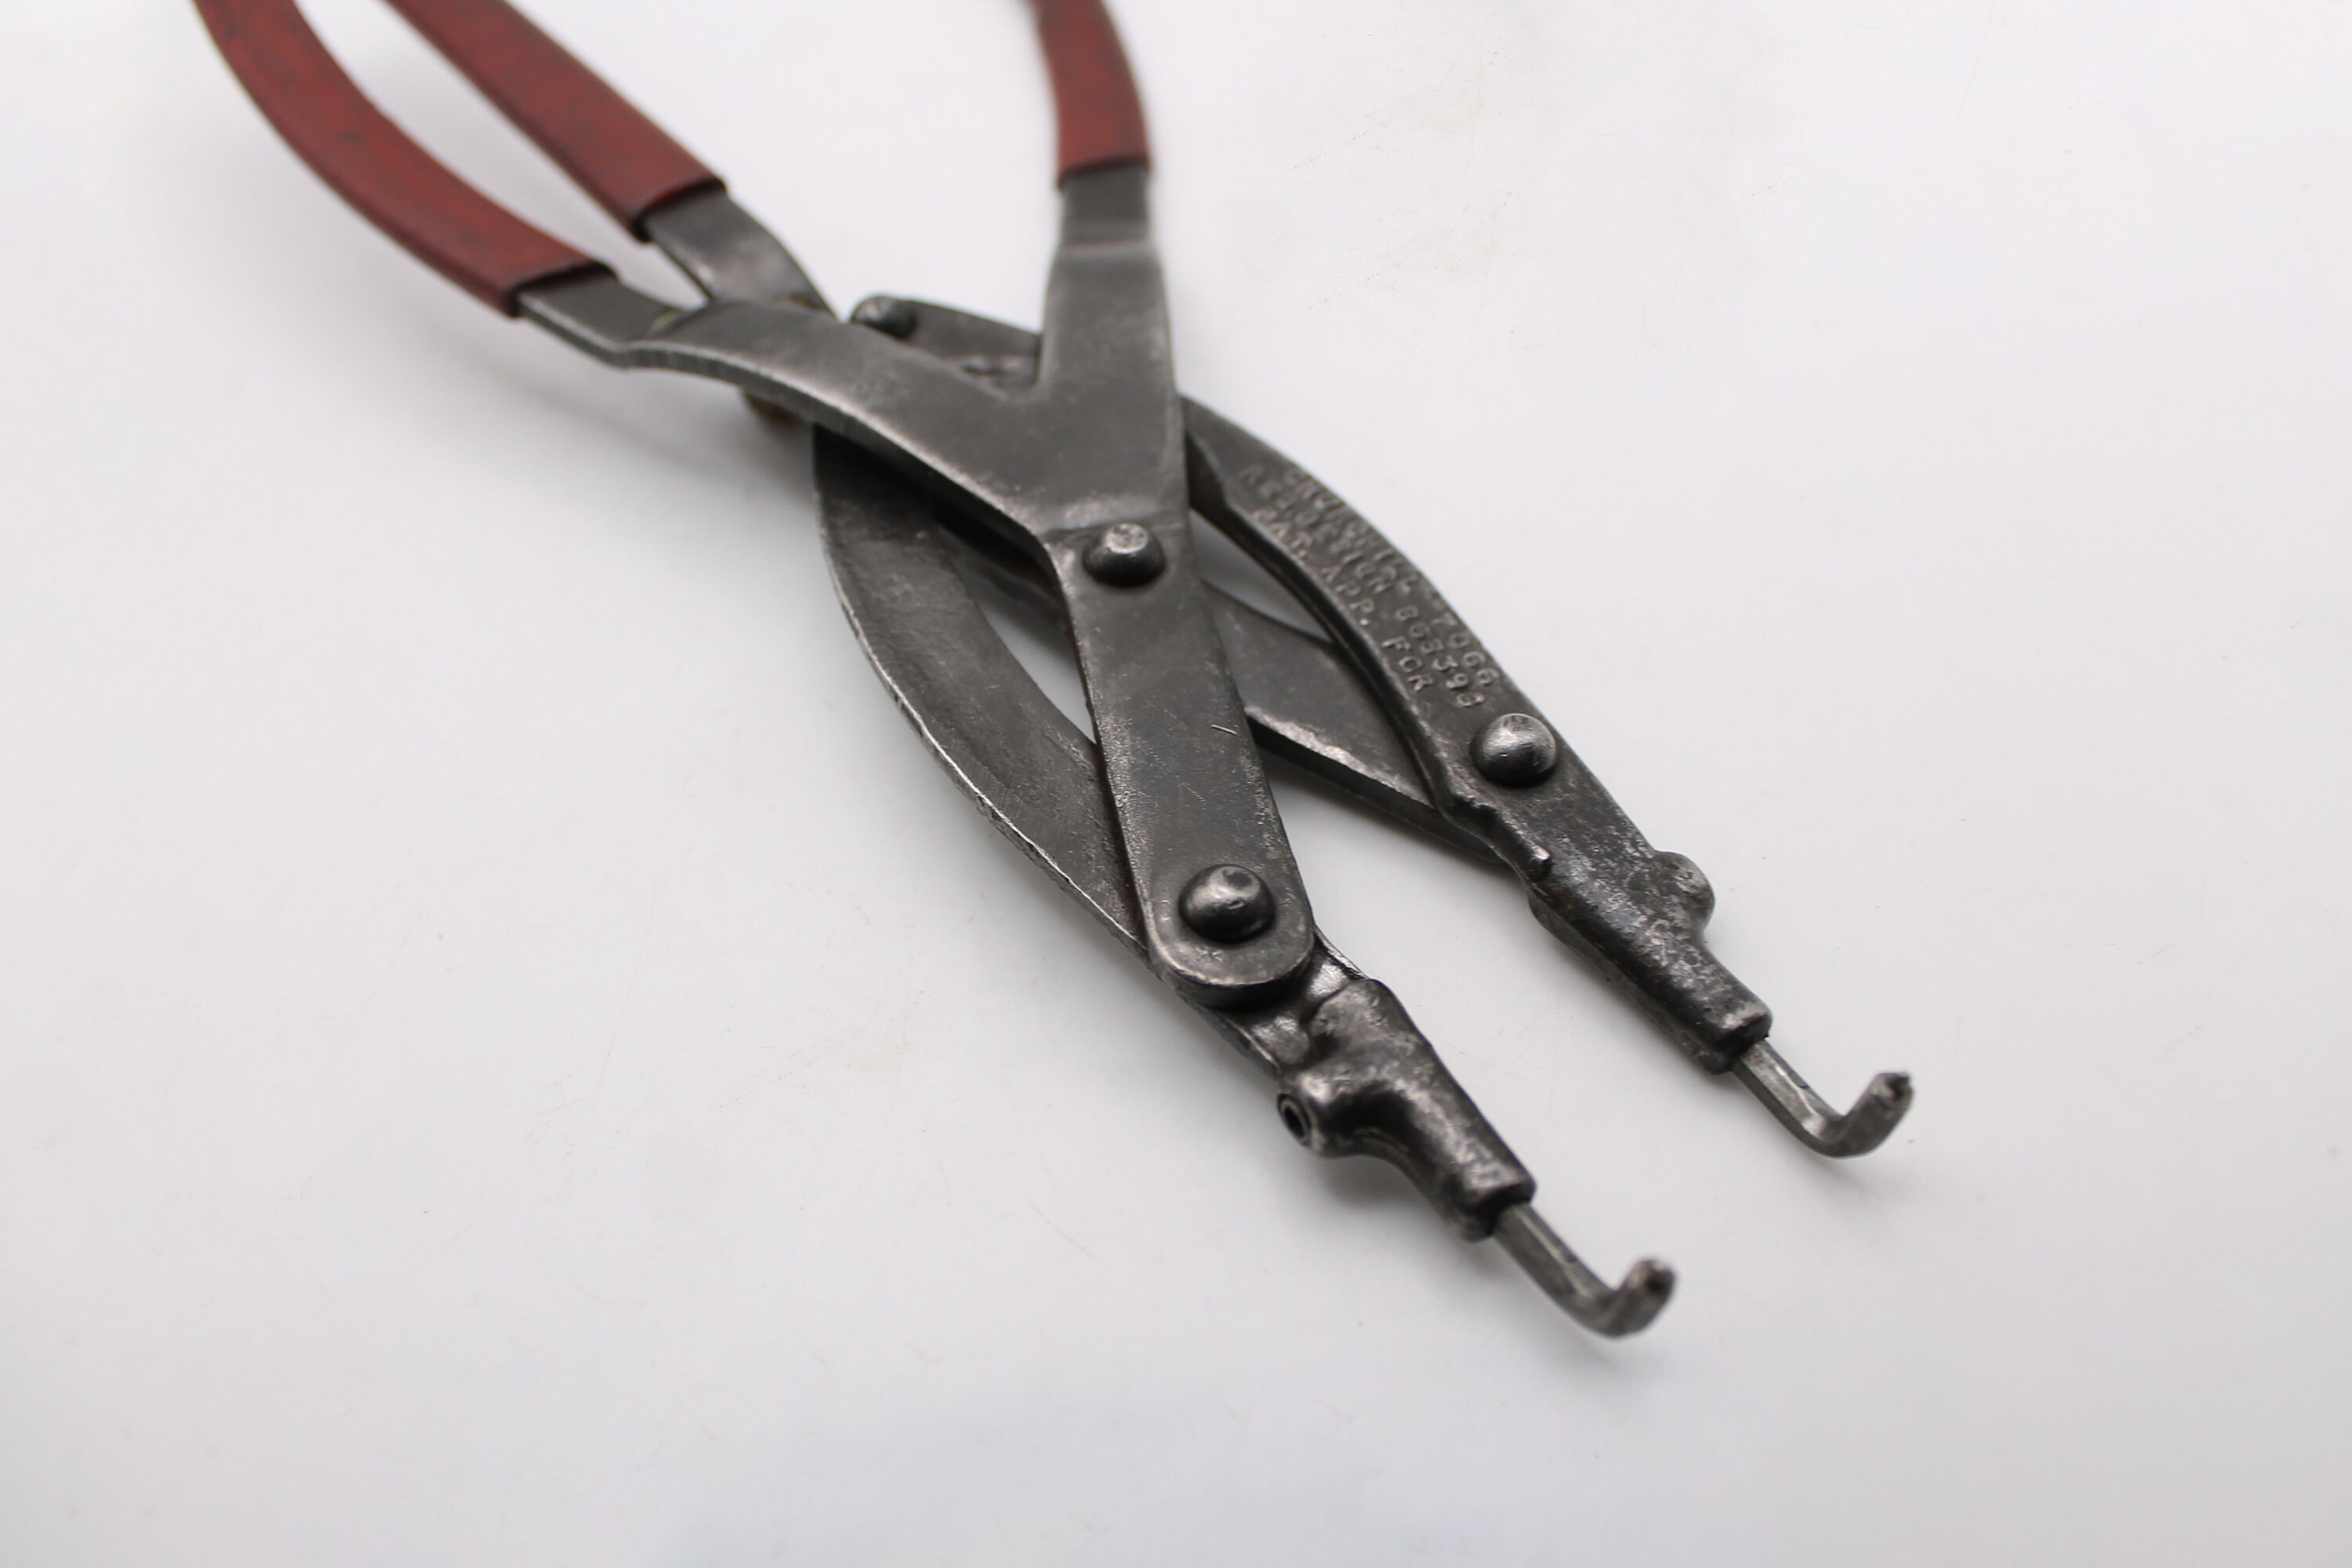 Needle Nose Pliers, Long Pointed Nose Pliers With Serrated Jaws